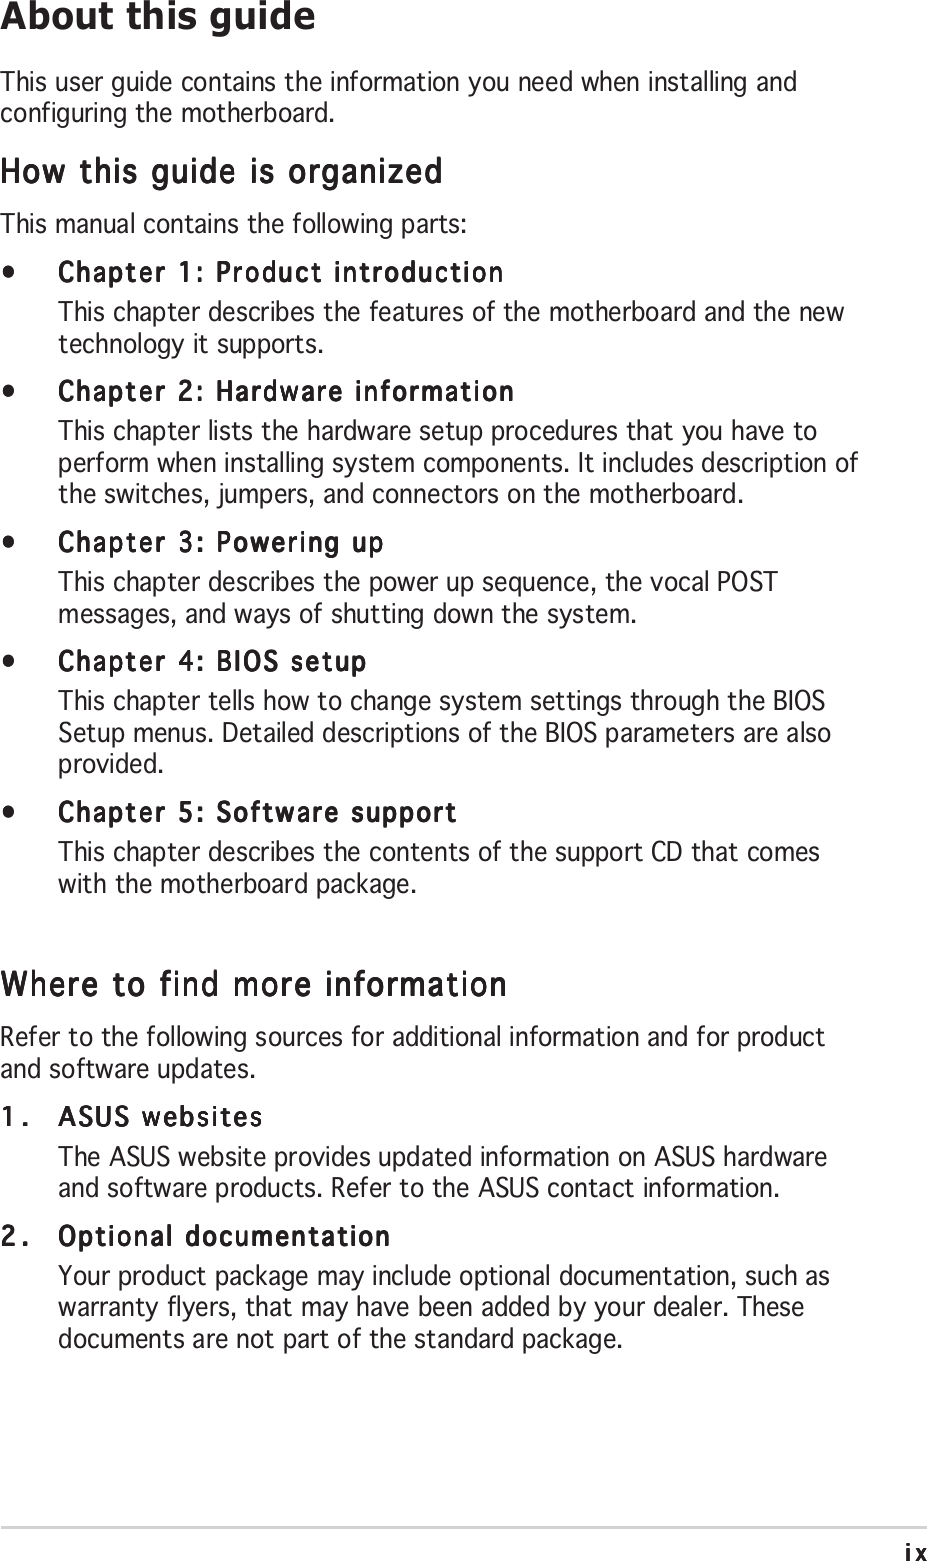 ixixixixixAbout this guideThis user guide contains the information you need when installing andconfiguring the motherboard.How this guide is organizedHow this guide is organizedHow this guide is organizedHow this guide is organizedHow this guide is organizedThis manual contains the following parts:•••••Chapter 1: Product introductionChapter 1: Product introductionChapter 1: Product introductionChapter 1: Product introductionChapter 1: Product introductionThis chapter describes the features of the motherboard and the newtechnology it supports.•••••Chapter 2: Hardware informationChapter 2: Hardware informationChapter 2: Hardware informationChapter 2: Hardware informationChapter 2: Hardware informationThis chapter lists the hardware setup procedures that you have toperform when installing system components. It includes description ofthe switches, jumpers, and connectors on the motherboard.•••••Chapter 3: Powering upChapter 3: Powering upChapter 3: Powering upChapter 3: Powering upChapter 3: Powering upThis chapter describes the power up sequence, the vocal POSTmessages, and ways of shutting down the system.•••••Chapter 4: BIOS setupChapter 4: BIOS setupChapter 4: BIOS setupChapter 4: BIOS setupChapter 4: BIOS setupThis chapter tells how to change system settings through the BIOSSetup menus. Detailed descriptions of the BIOS parameters are alsoprovided.•••••Chapter 5: Software supportChapter 5: Software supportChapter 5: Software supportChapter 5: Software supportChapter 5: Software supportThis chapter describes the contents of the support CD that comeswith the motherboard package.Where to find more informationWhere to find more informationWhere to find more informationWhere to find more informationWhere to find more informationRefer to the following sources for additional information and for productand software updates.1.1.1.1.1. ASUS websitesASUS websitesASUS websitesASUS websitesASUS websitesThe ASUS website provides updated information on ASUS hardwareand software products. Refer to the ASUS contact information.2.2.2.2.2. Optional documentationOptional documentationOptional documentationOptional documentationOptional documentationYour product package may include optional documentation, such aswarranty flyers, that may have been added by your dealer. Thesedocuments are not part of the standard package.